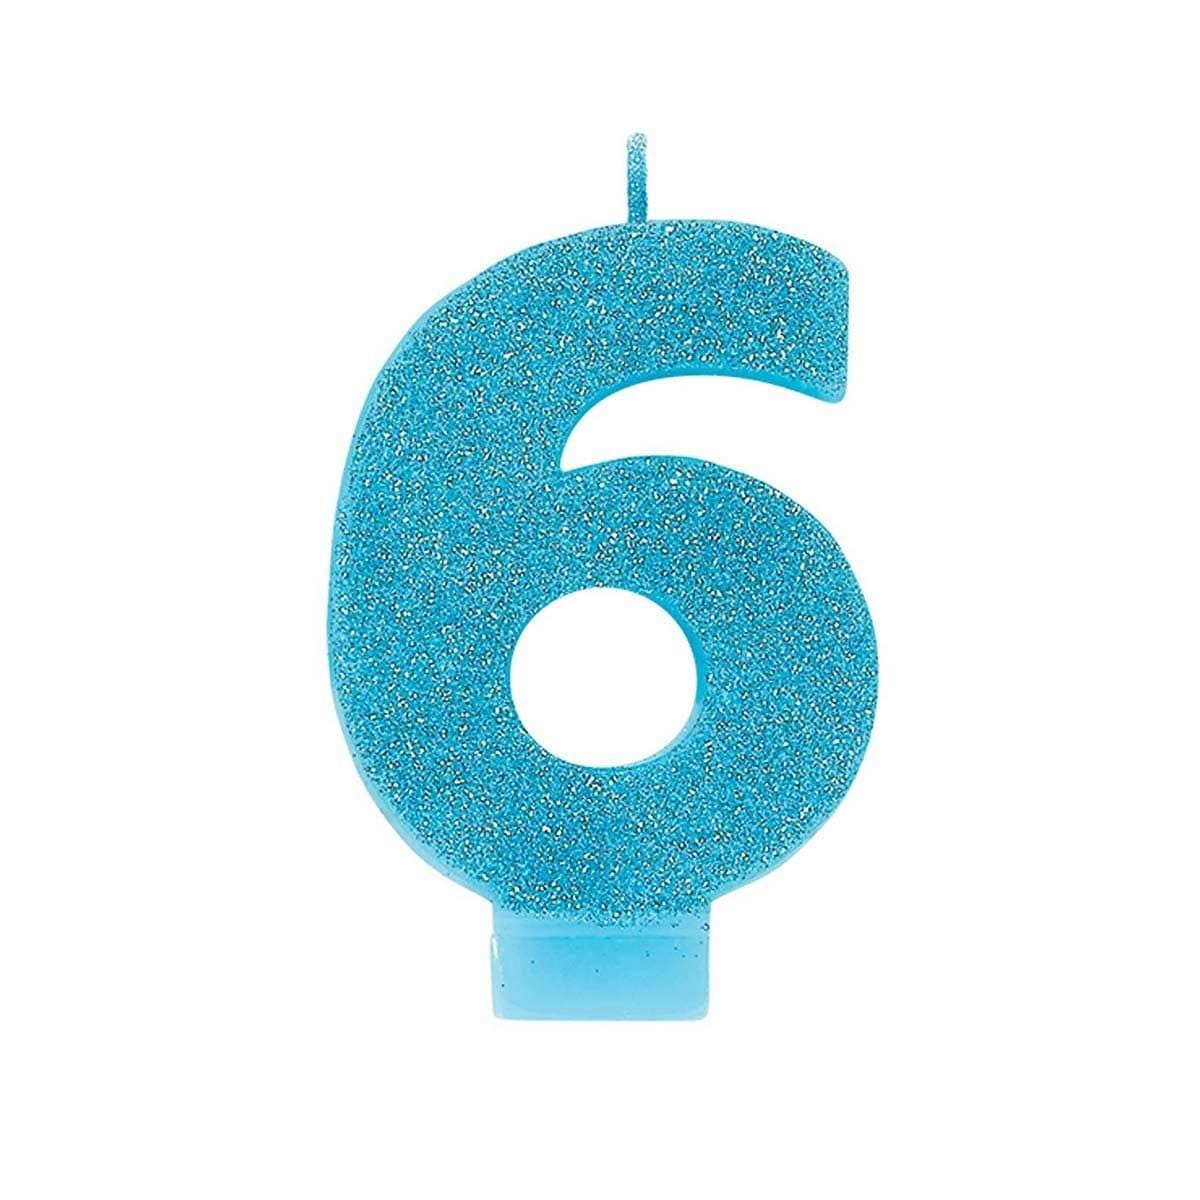 Buy Cake Supplies Numeral Glitter Candle #6 - Caribbean Blue sold at Party Expert